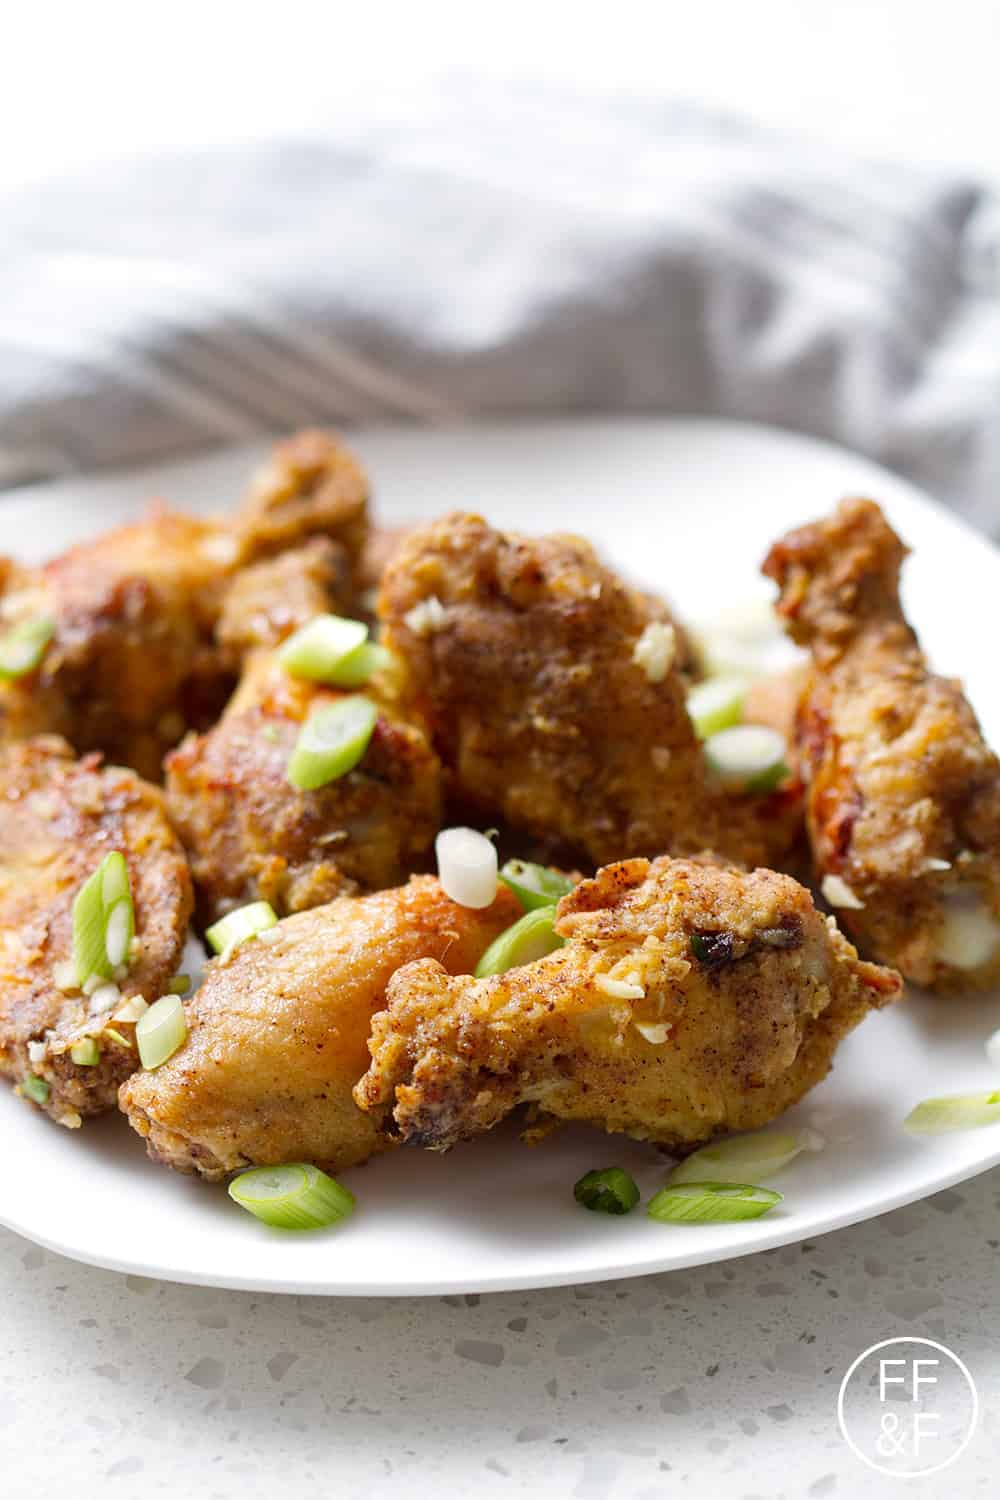 Vietnamese Baked Chicken Wings for game day!